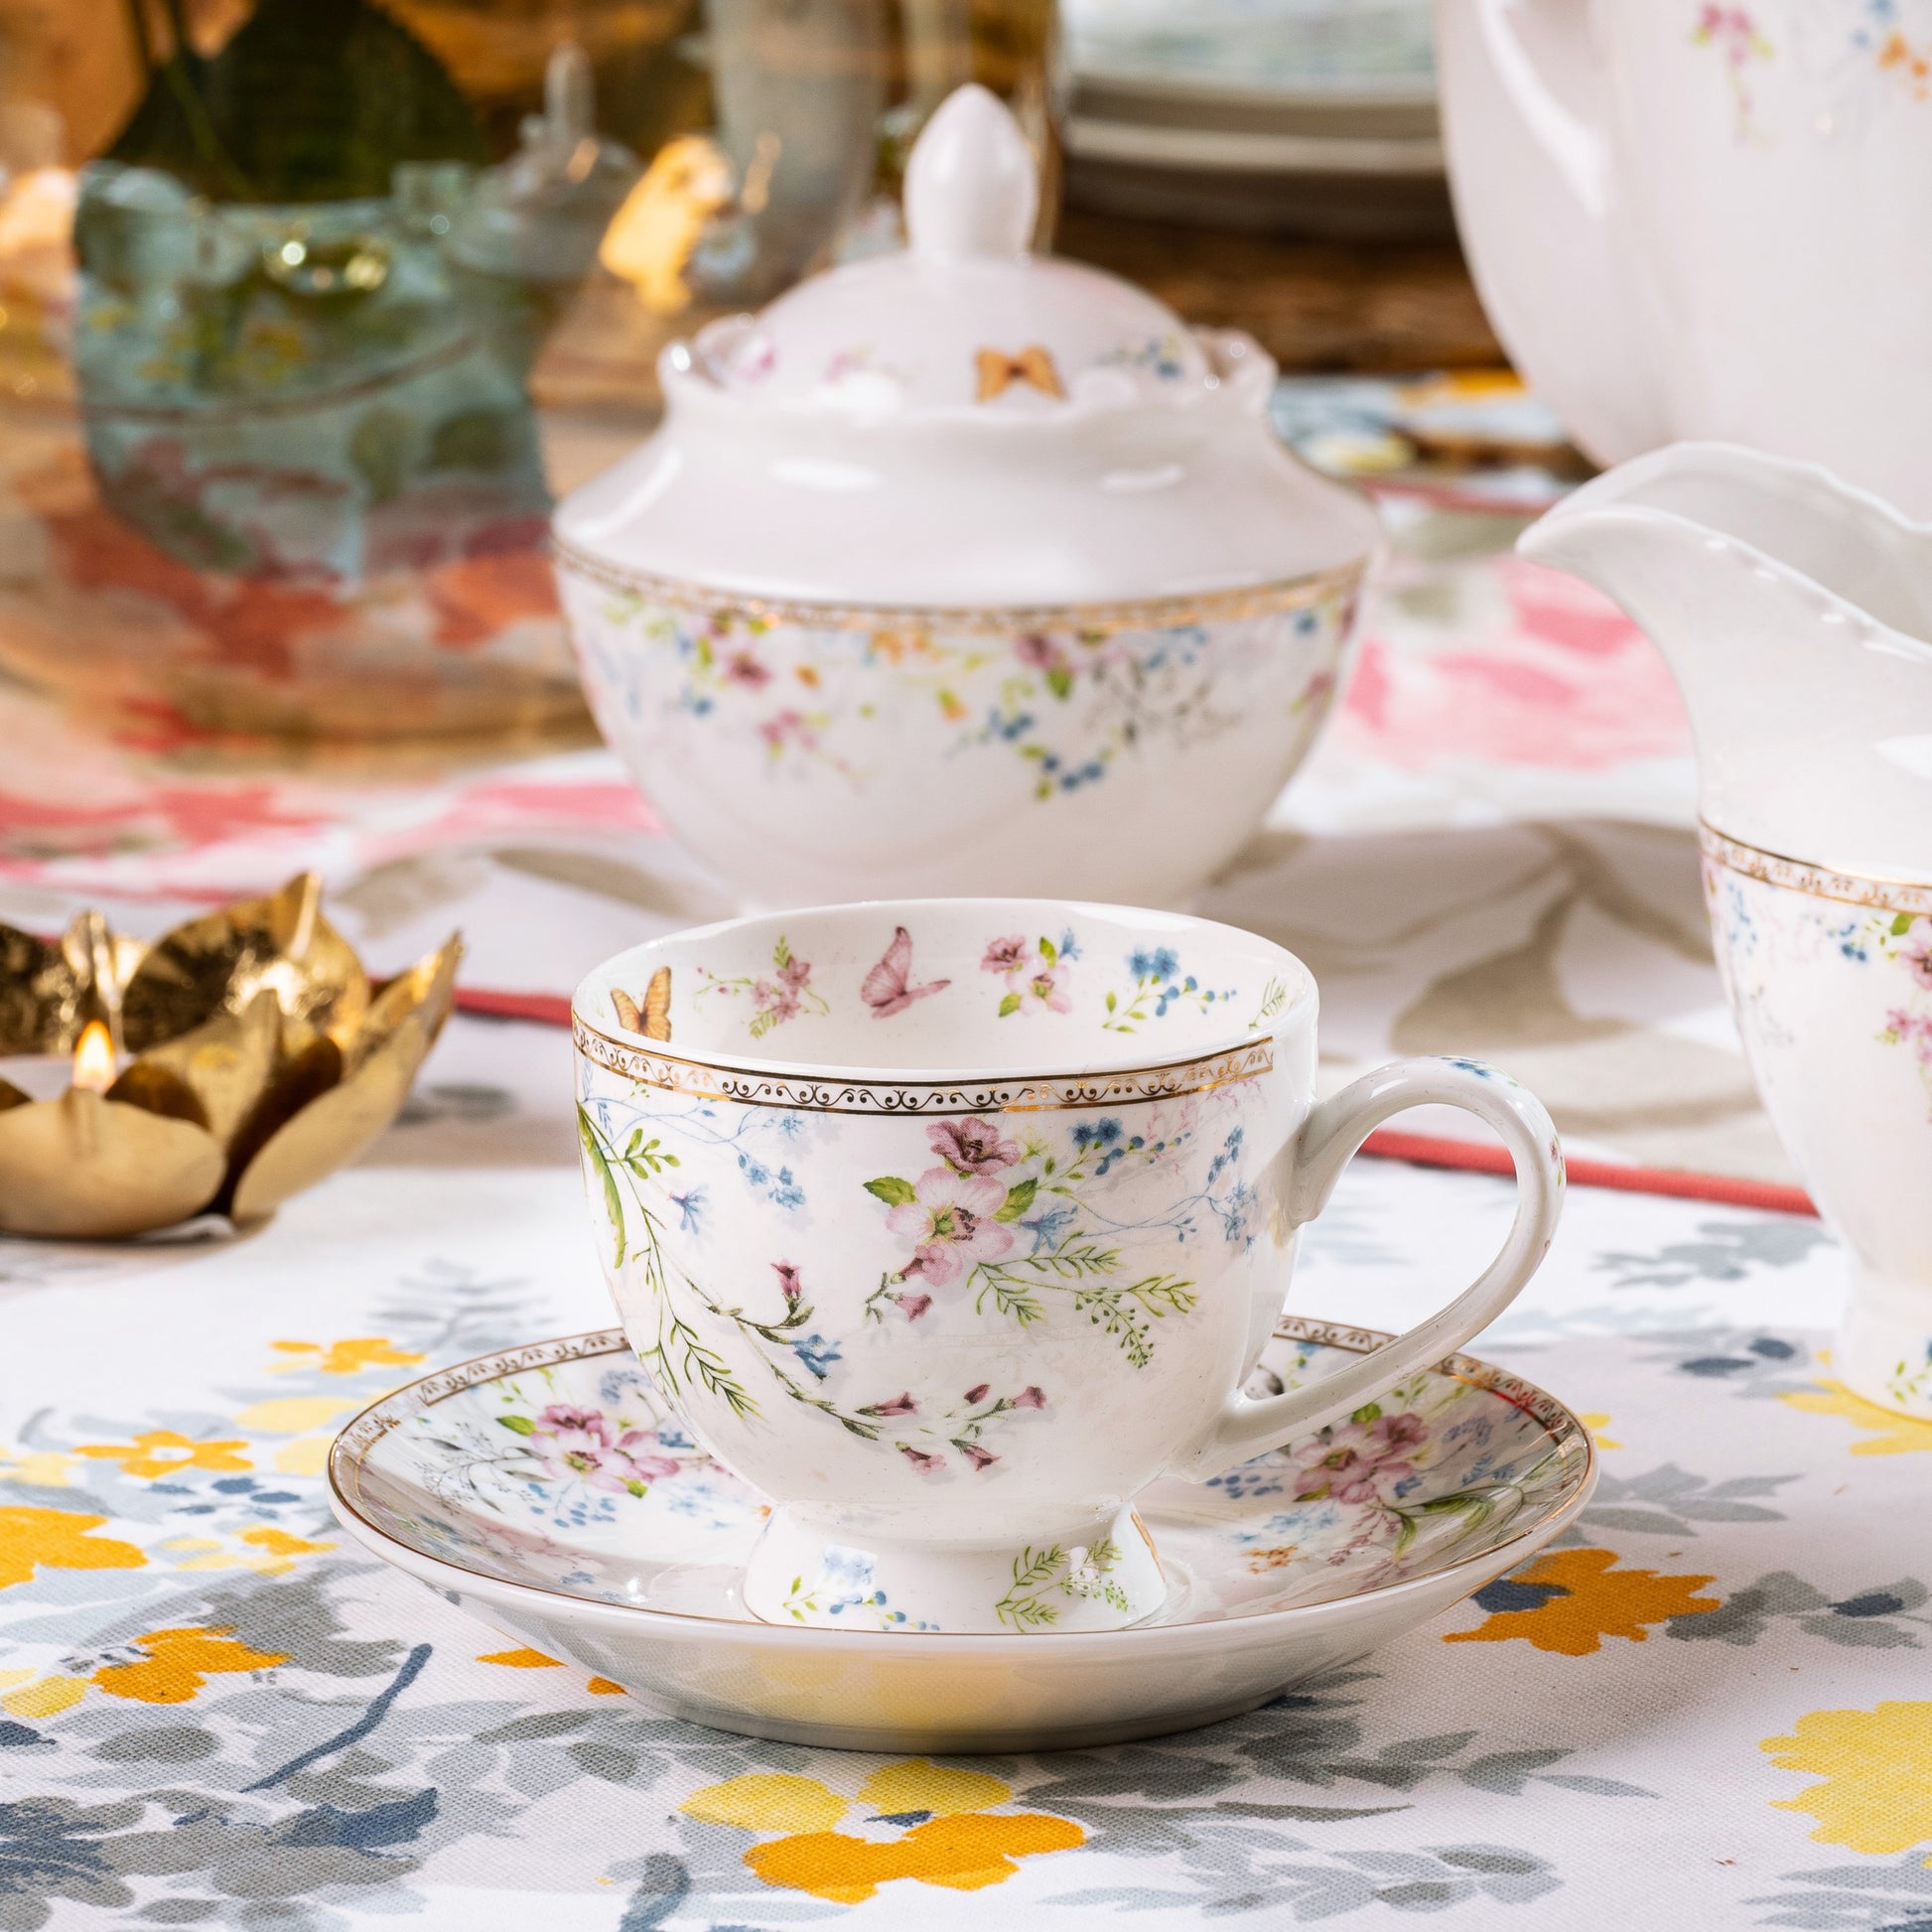 Flower Bed Cup and Saucer Set (6 Cups and 6 Saucers)